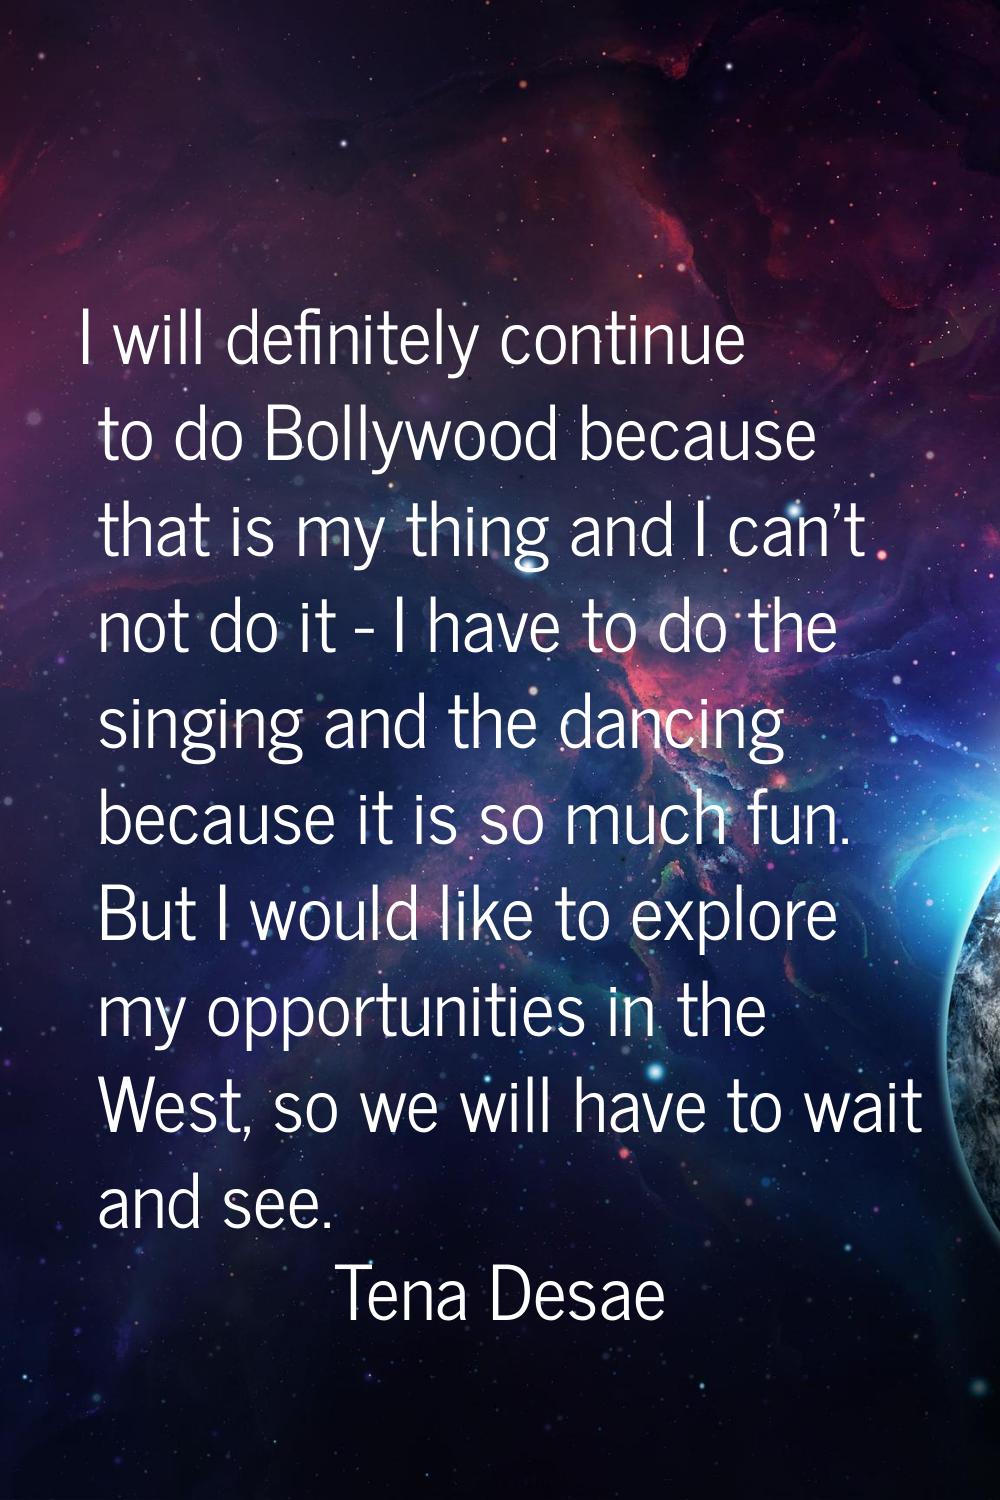 I will definitely continue to do Bollywood because that is my thing and I can't not do it - I have 